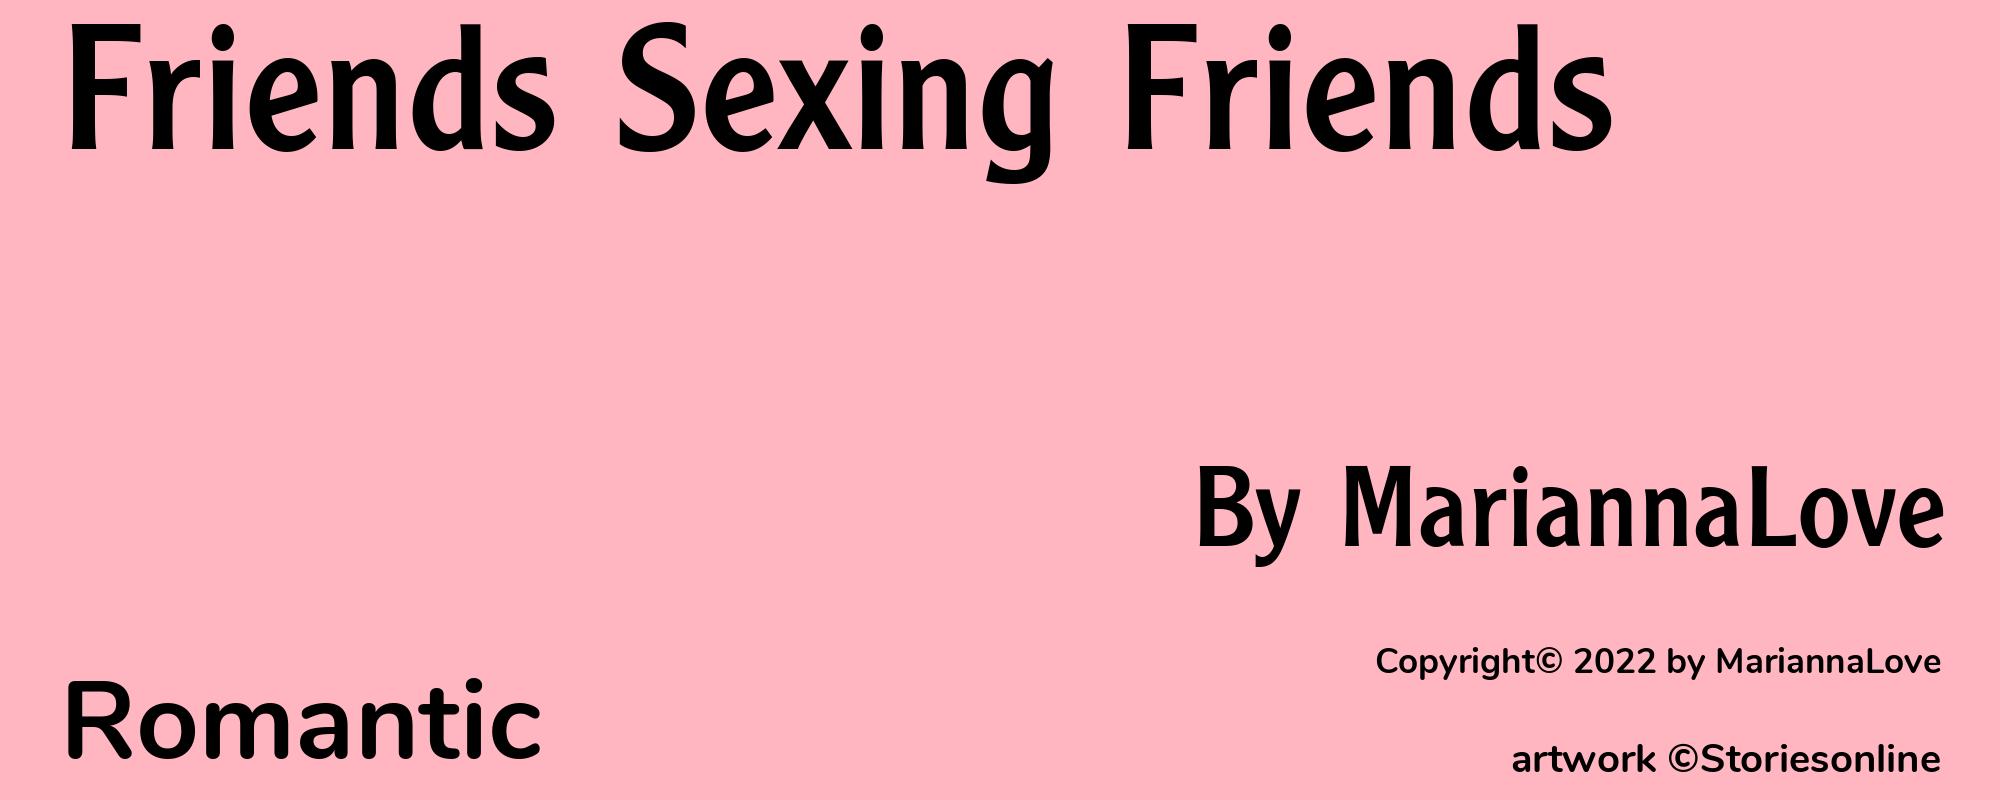 Friends Sexing Friends - Cover